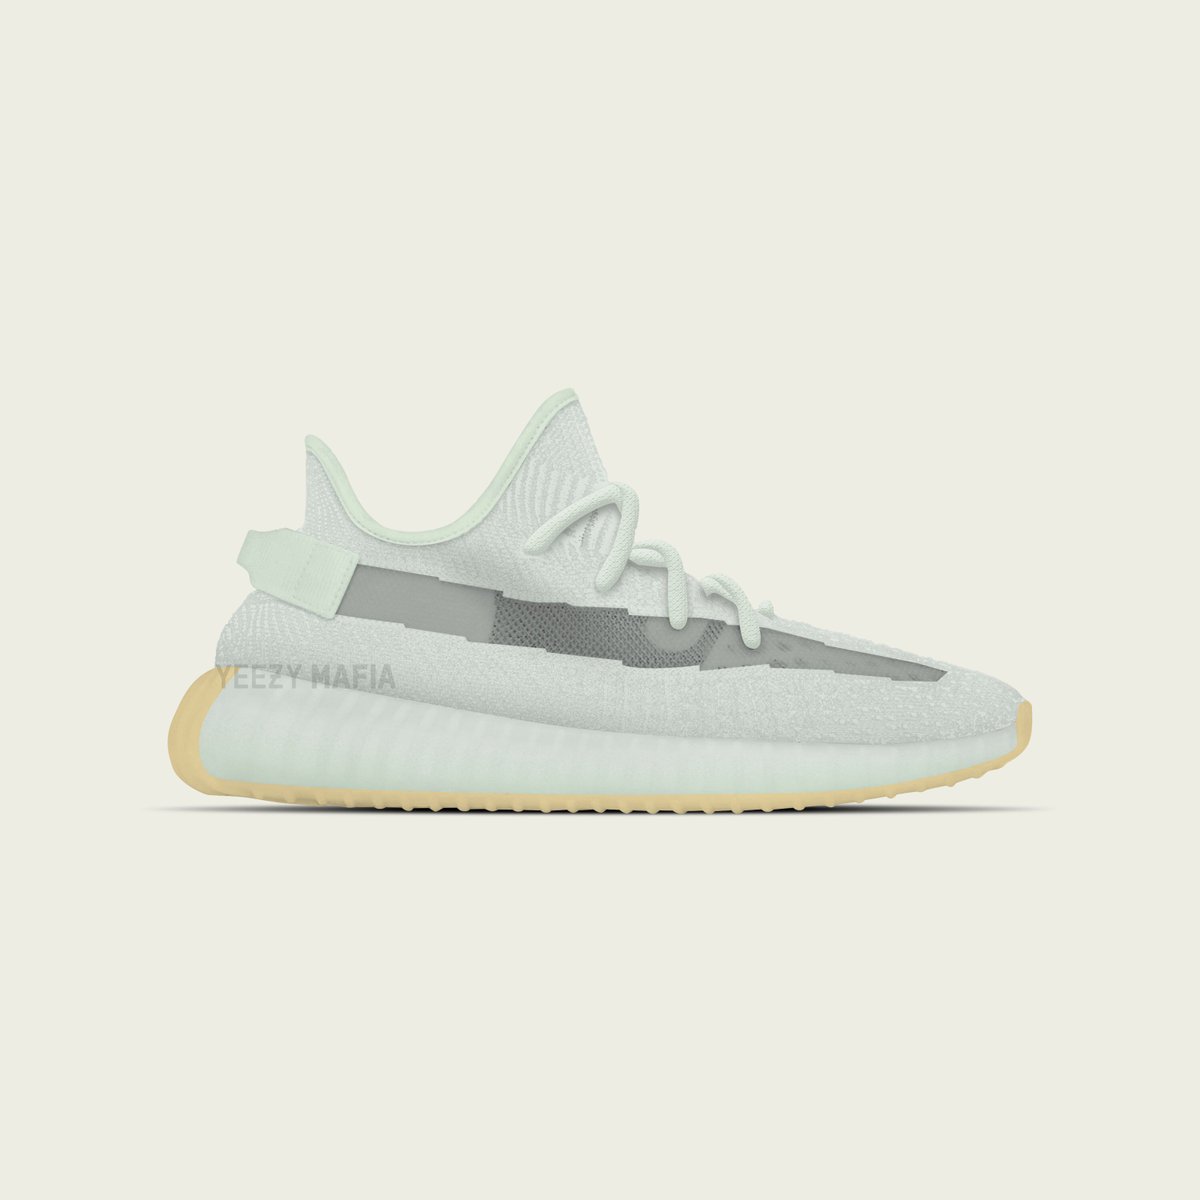 YEEZY BOOST 350 V2 HYPERSPACE SPECIAL 